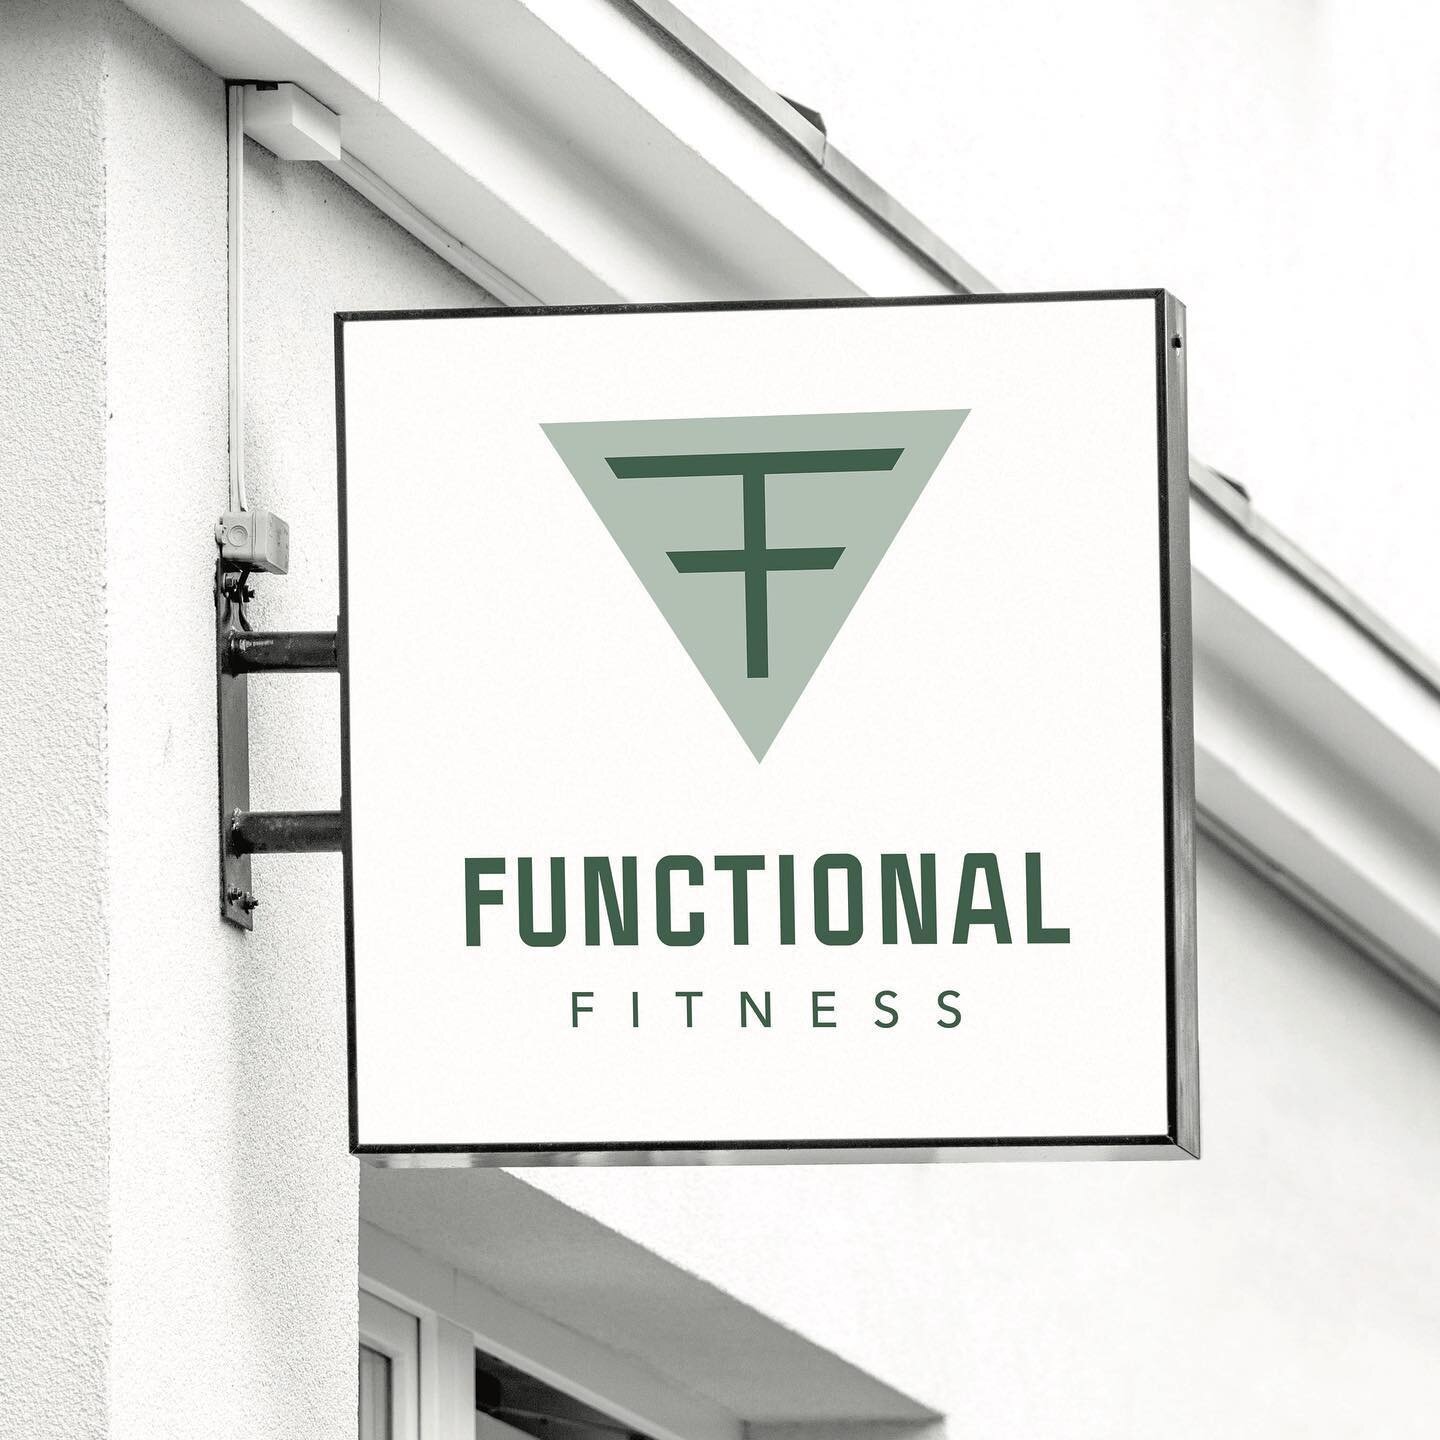 This is a logo we designed earlier this year for a gym in Charleville, Queensland @functionalfitnesshw 
This was a fun one to work on! Mick (the owner) has a really solid grasp on the brand that he wants to create at Functional Fitness which really h